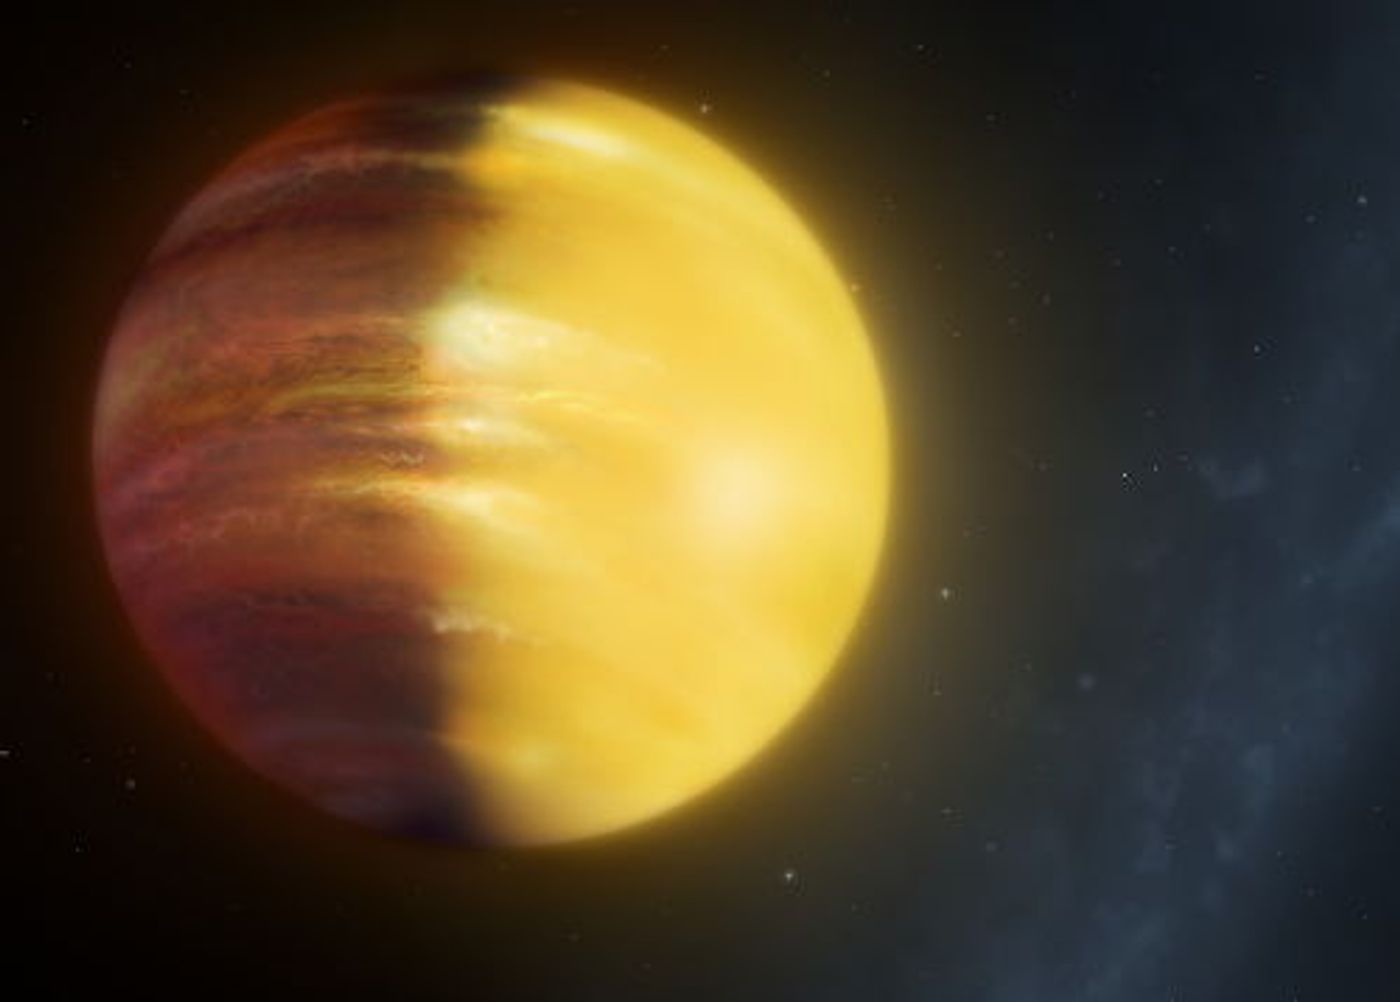 An artist's rendition of HAT-P-7b, the hot Jupiter-like exoplanet that has clouds of vaporized gem minerals.